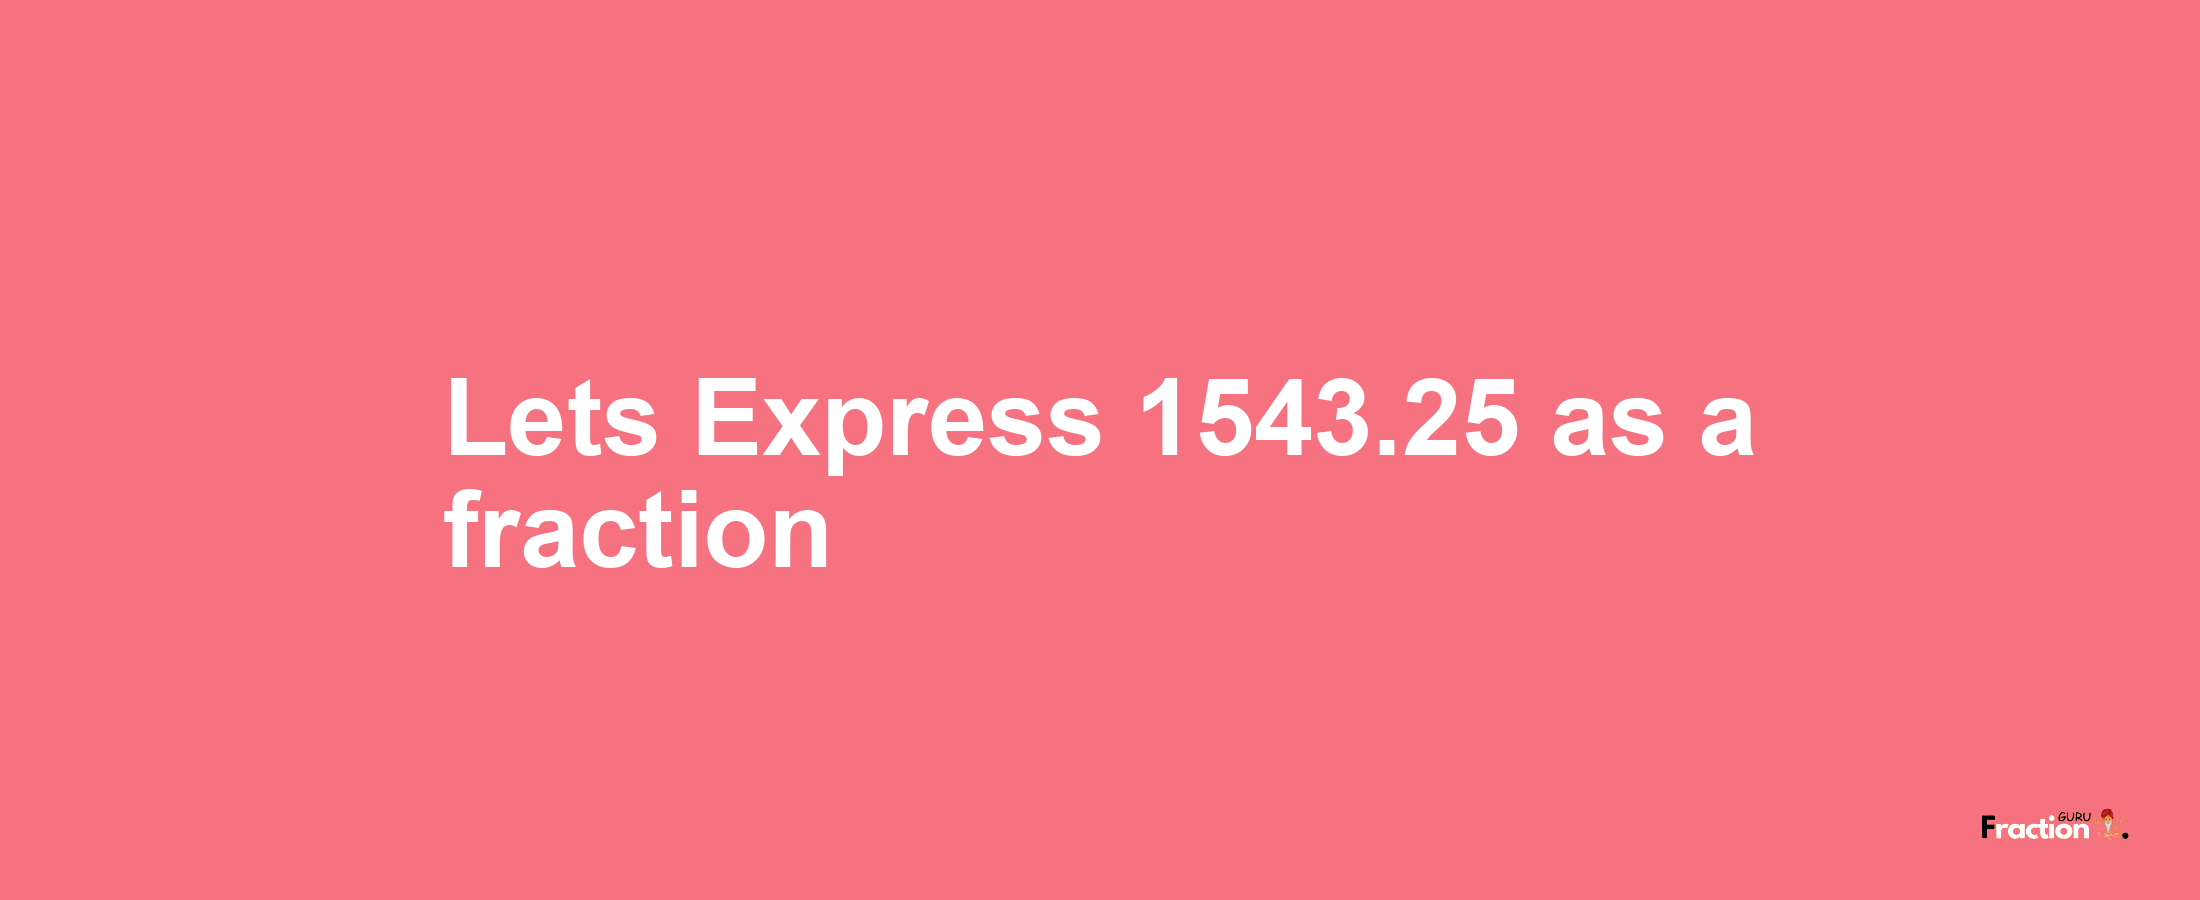 Lets Express 1543.25 as afraction